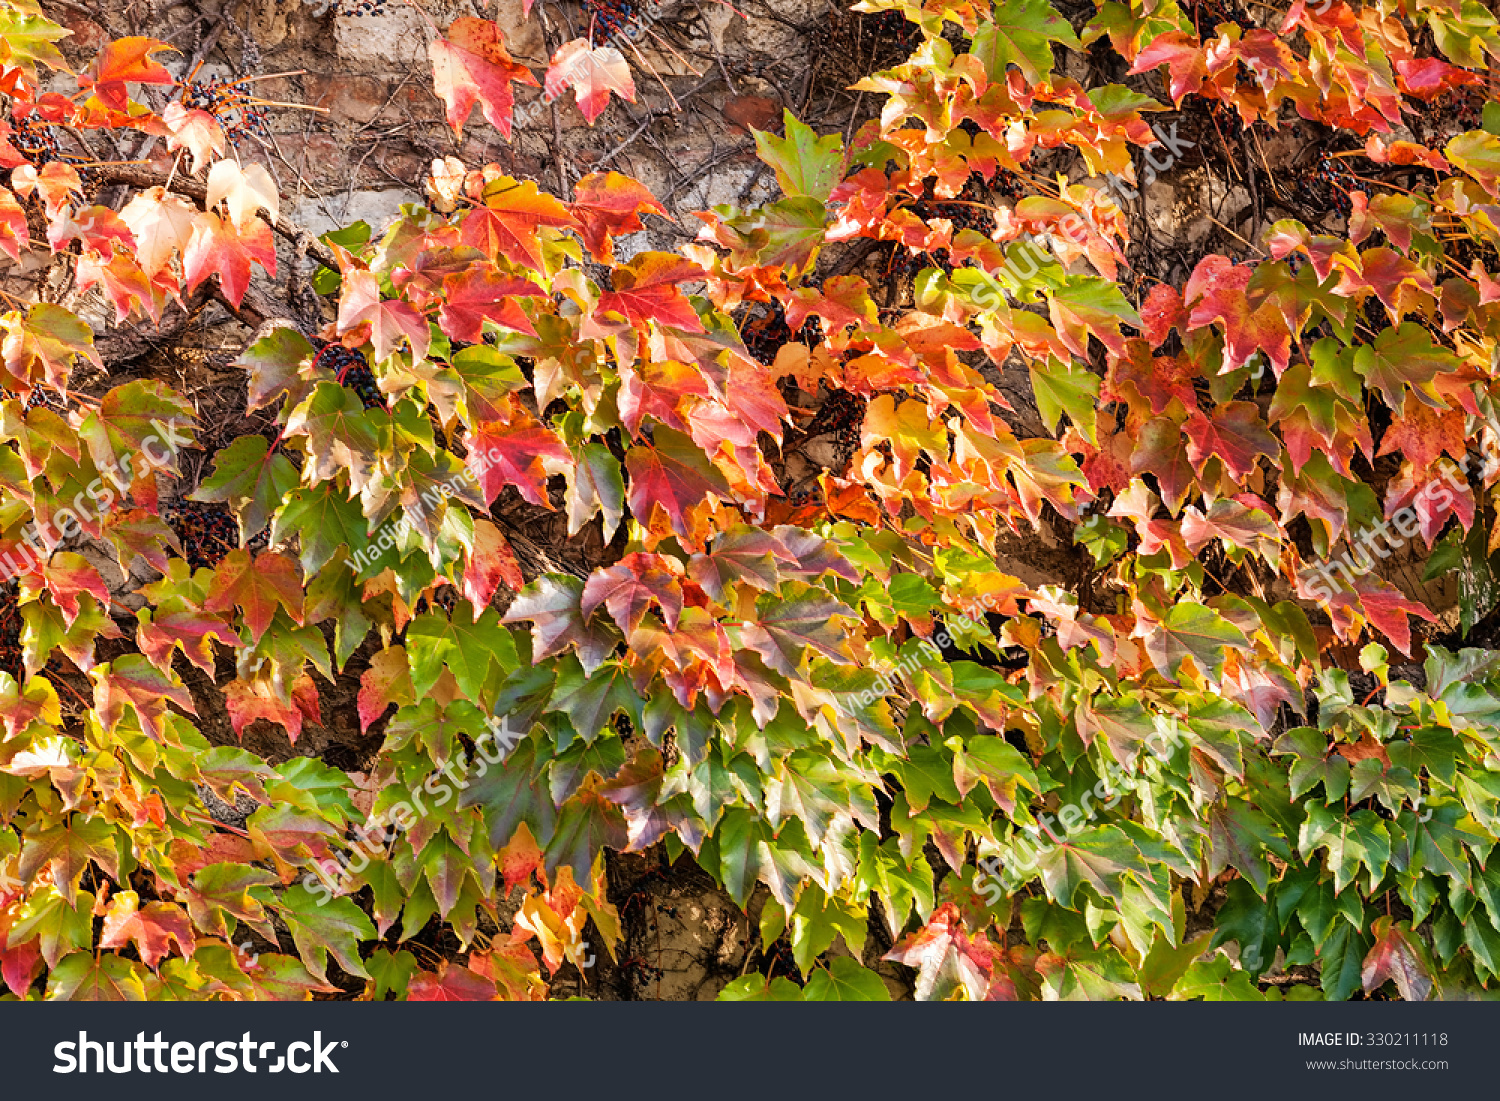 orange and green leaves on a old stone wall #330211118